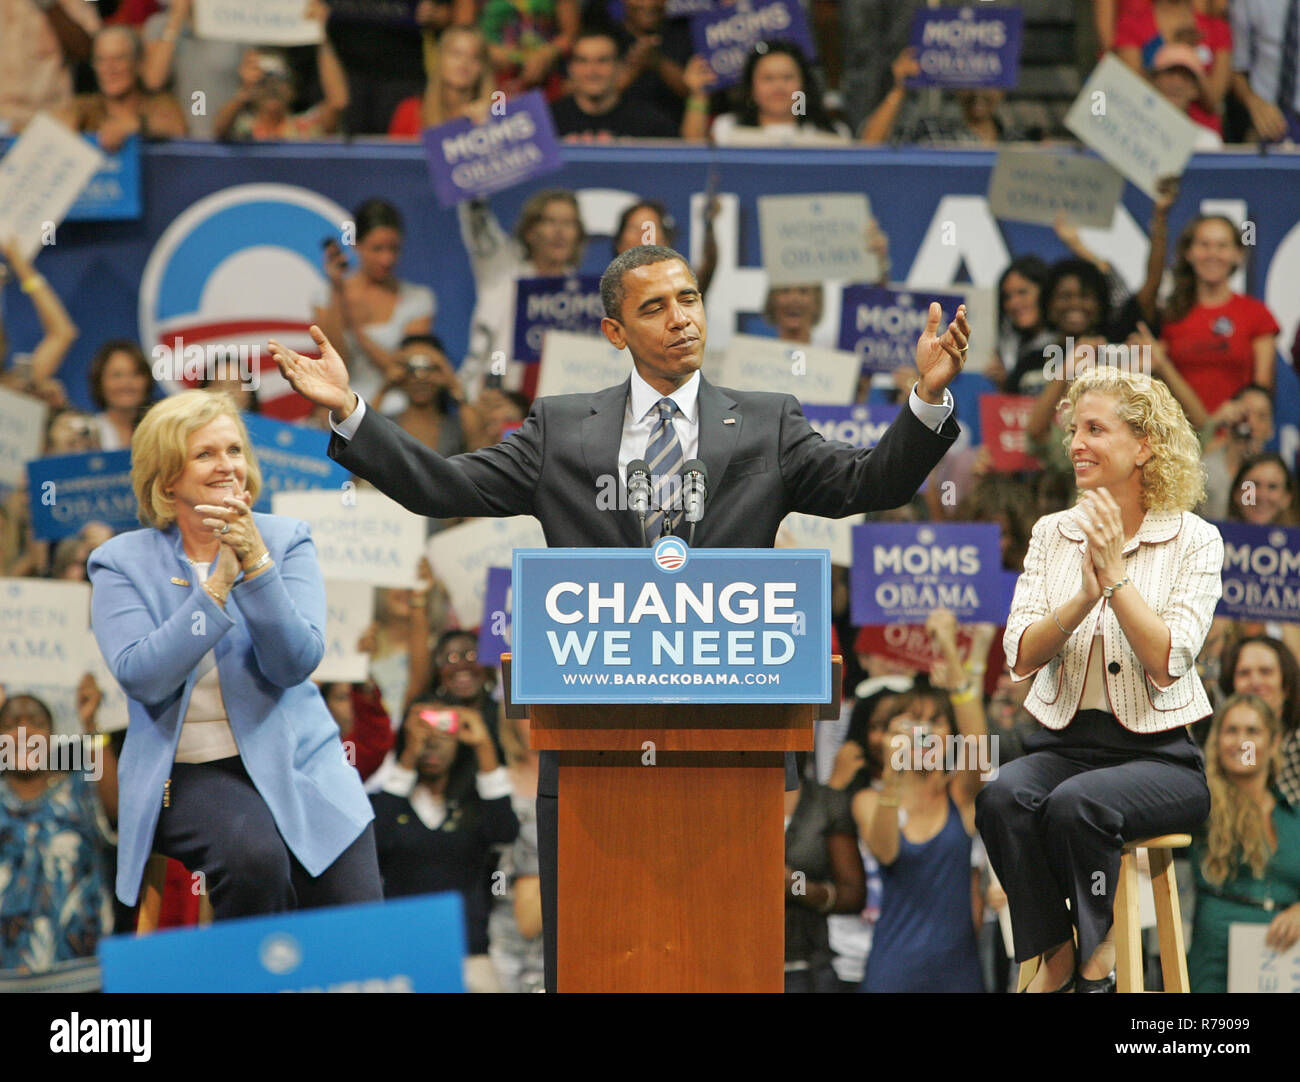 Democratic presidential candidate Senator Barack Obama, flanked by Sen. Claire McCaskill (L) and Rep. Debbie Wasserman Schults speaks at a rally at the BankUnited Center in Coral Gables, Florida on September 19, 2008. Stock Photo